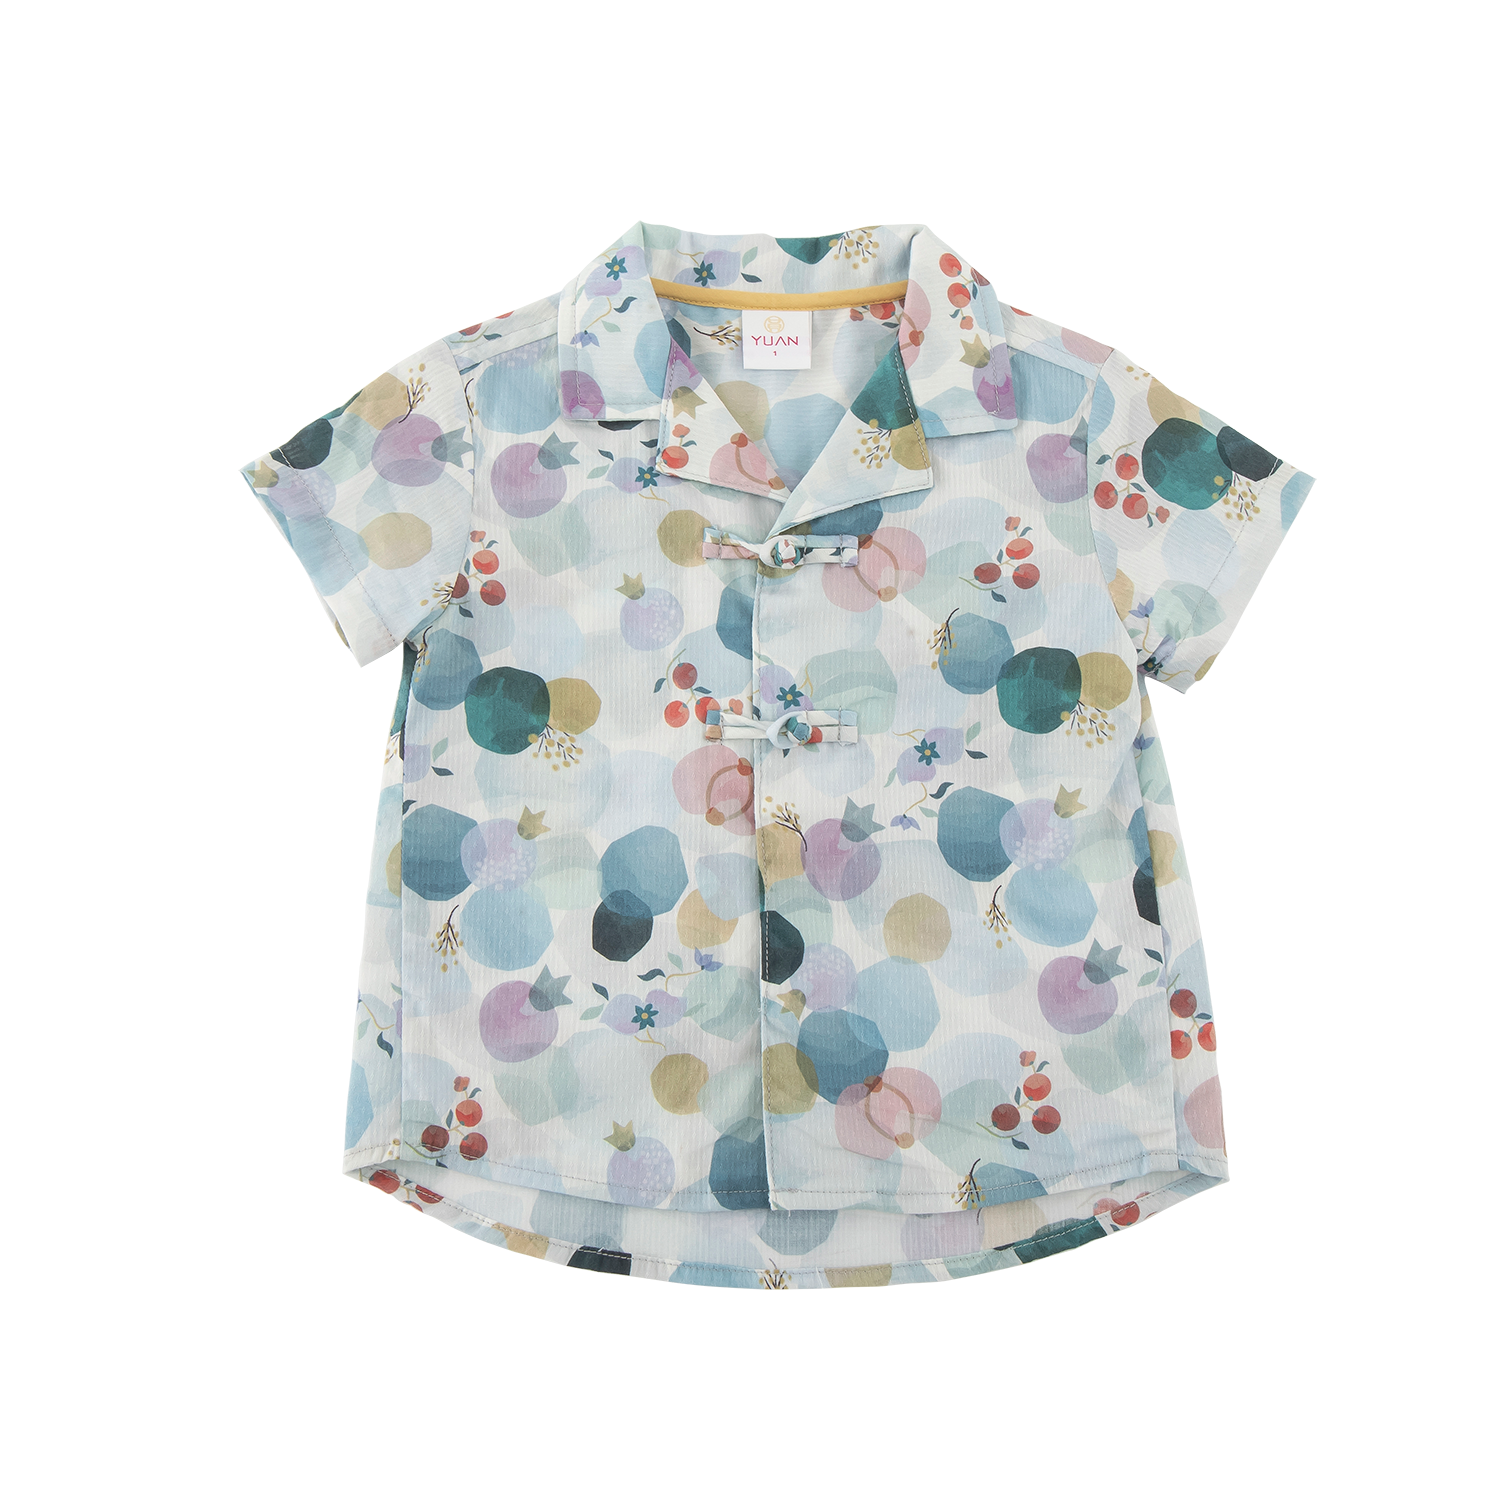 <tc>orchid baby button down shirt with three rounds print</tc>